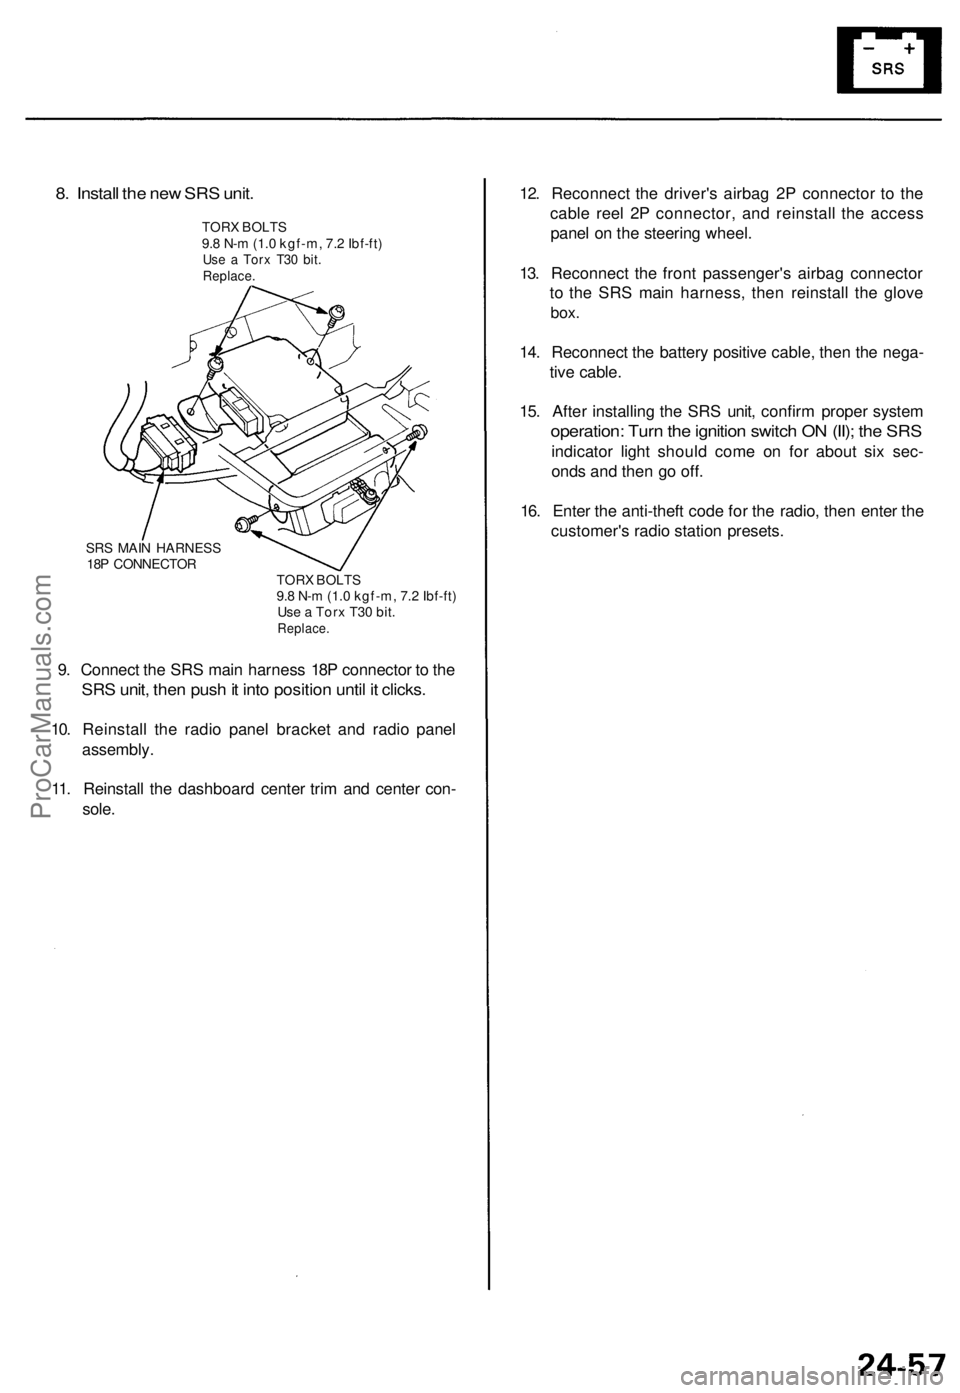 ACURA TL 1995  Service Repair Manual 
8. Install the new SRS unit.

TORX BOLTS

9.8 N-m (1.0 kgf-m, 7.2 Ibf-ft)

Use a Torx T30 bit.

Replace.

SRS MAIN HARNESS

18P CONNECTOR

TORX BOLTS

9.8 N-m (1.0 kgf-m, 7.2 Ibf-ft)

Use a Torx T30 